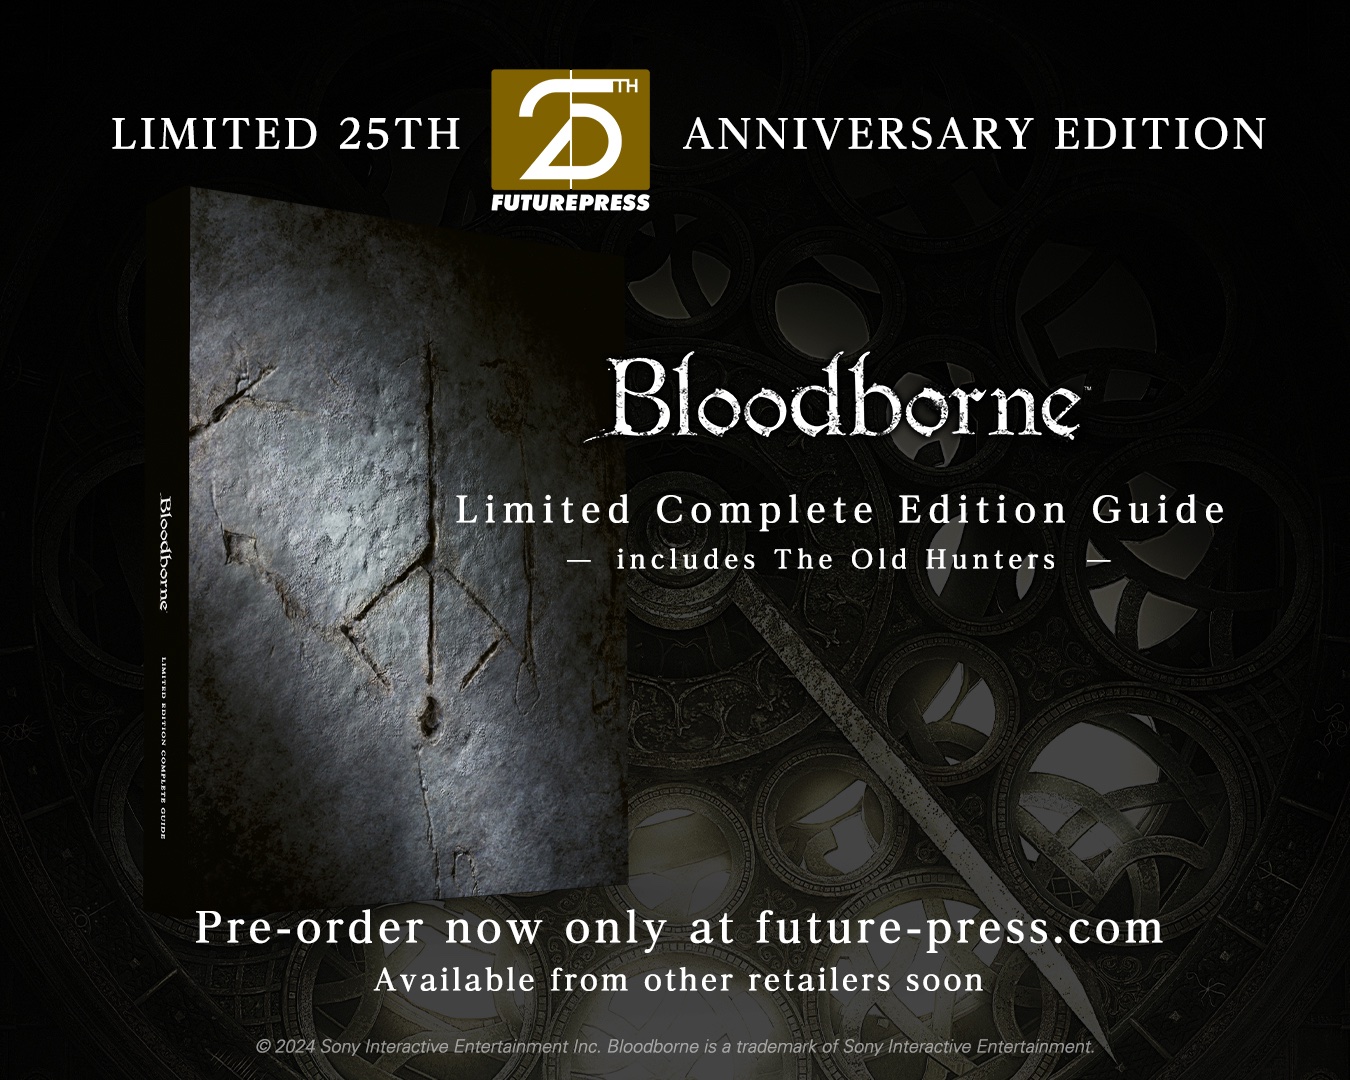 EAN : 9783869931333 - Bloodborne Complete Edition Guide 25th Anniversary